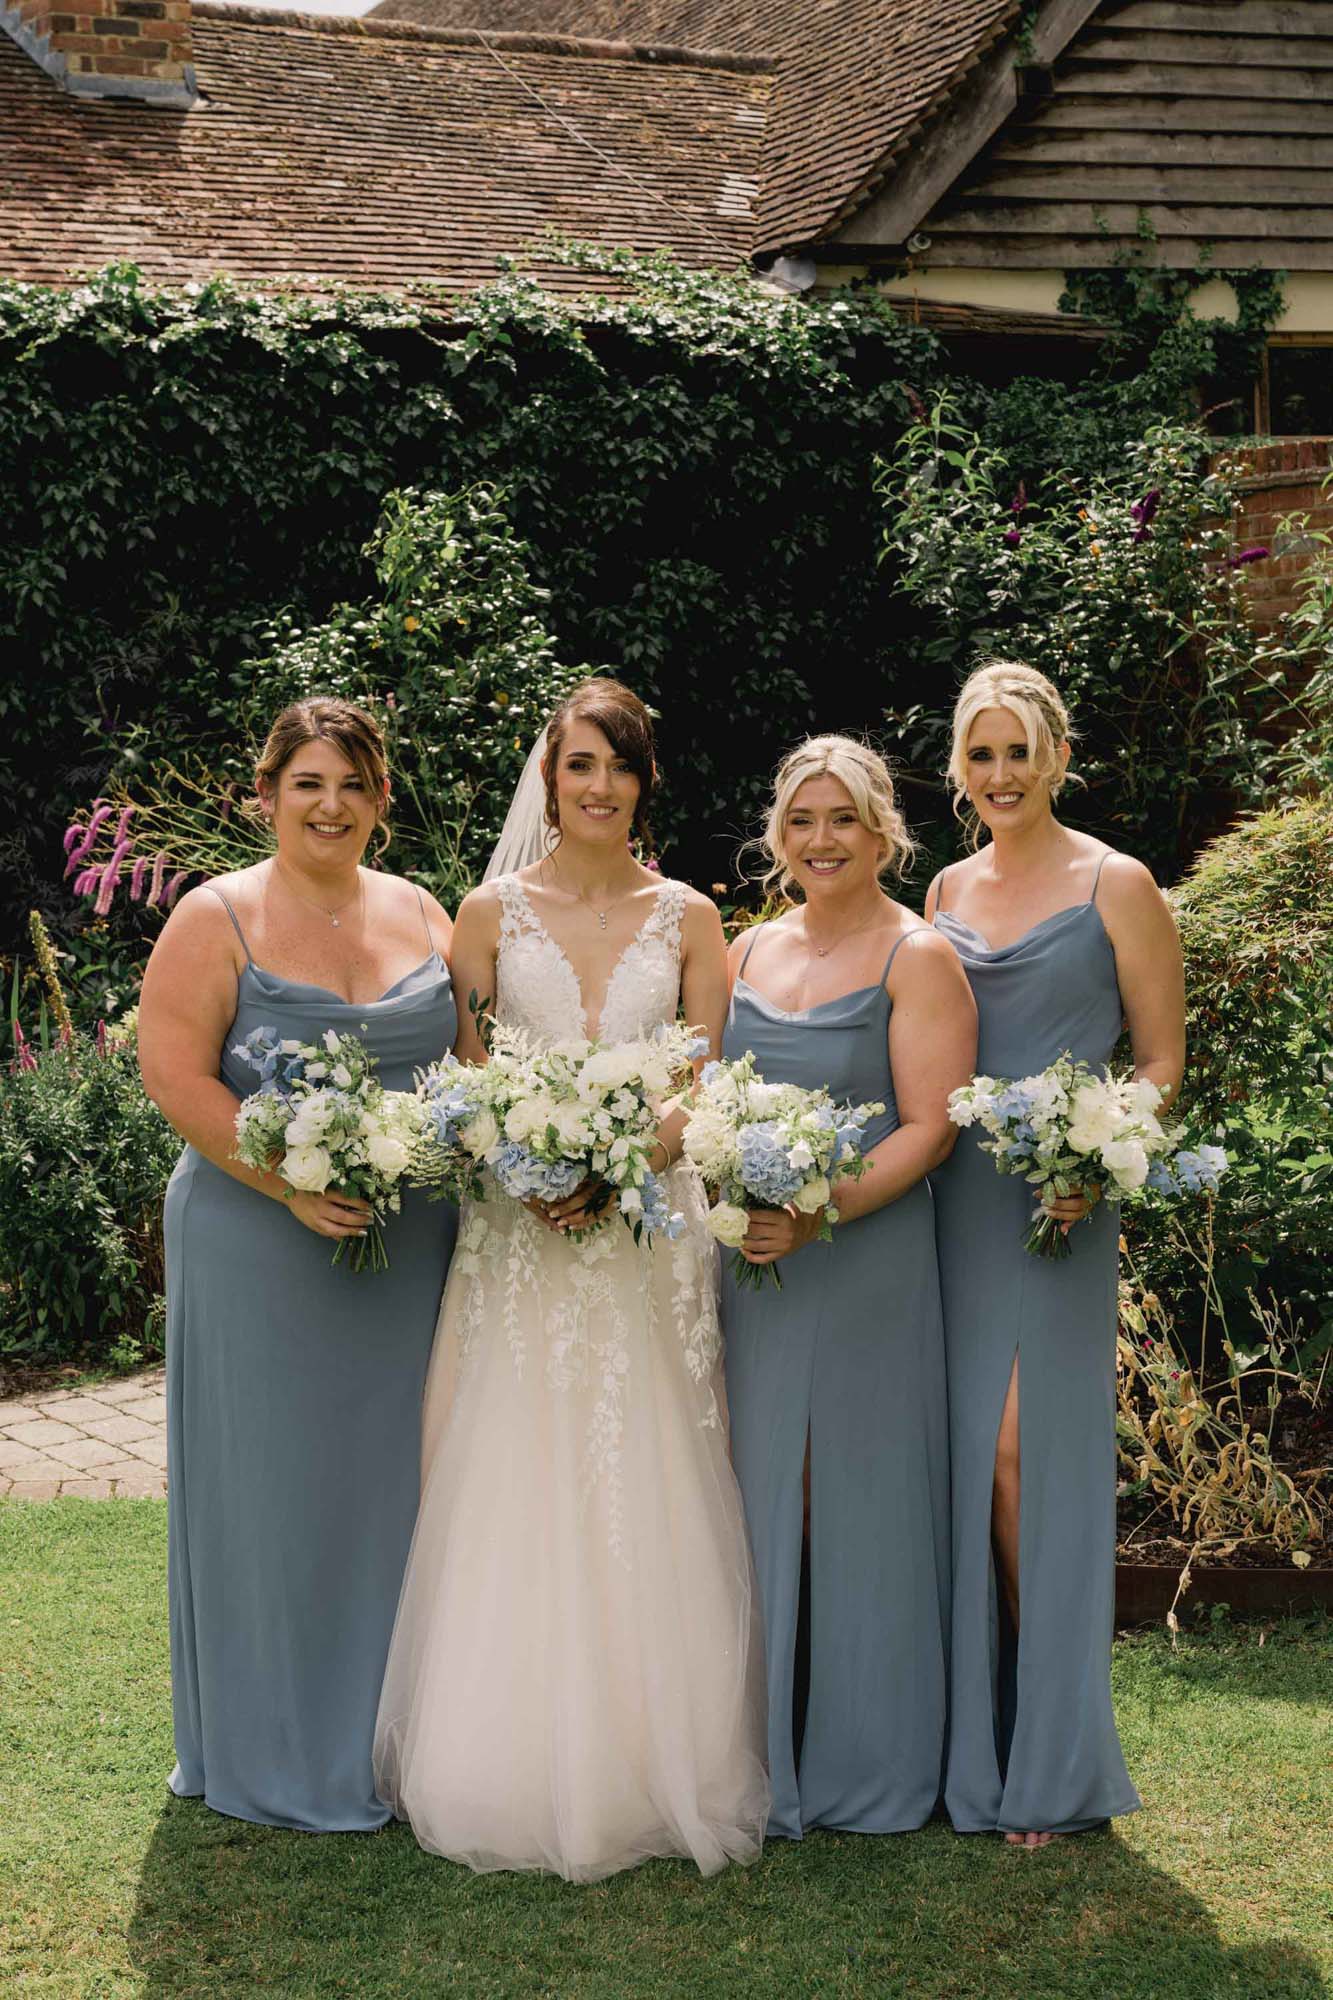 Bride and her 3 bridesmaids at Rivervale Barn in Hampshire.